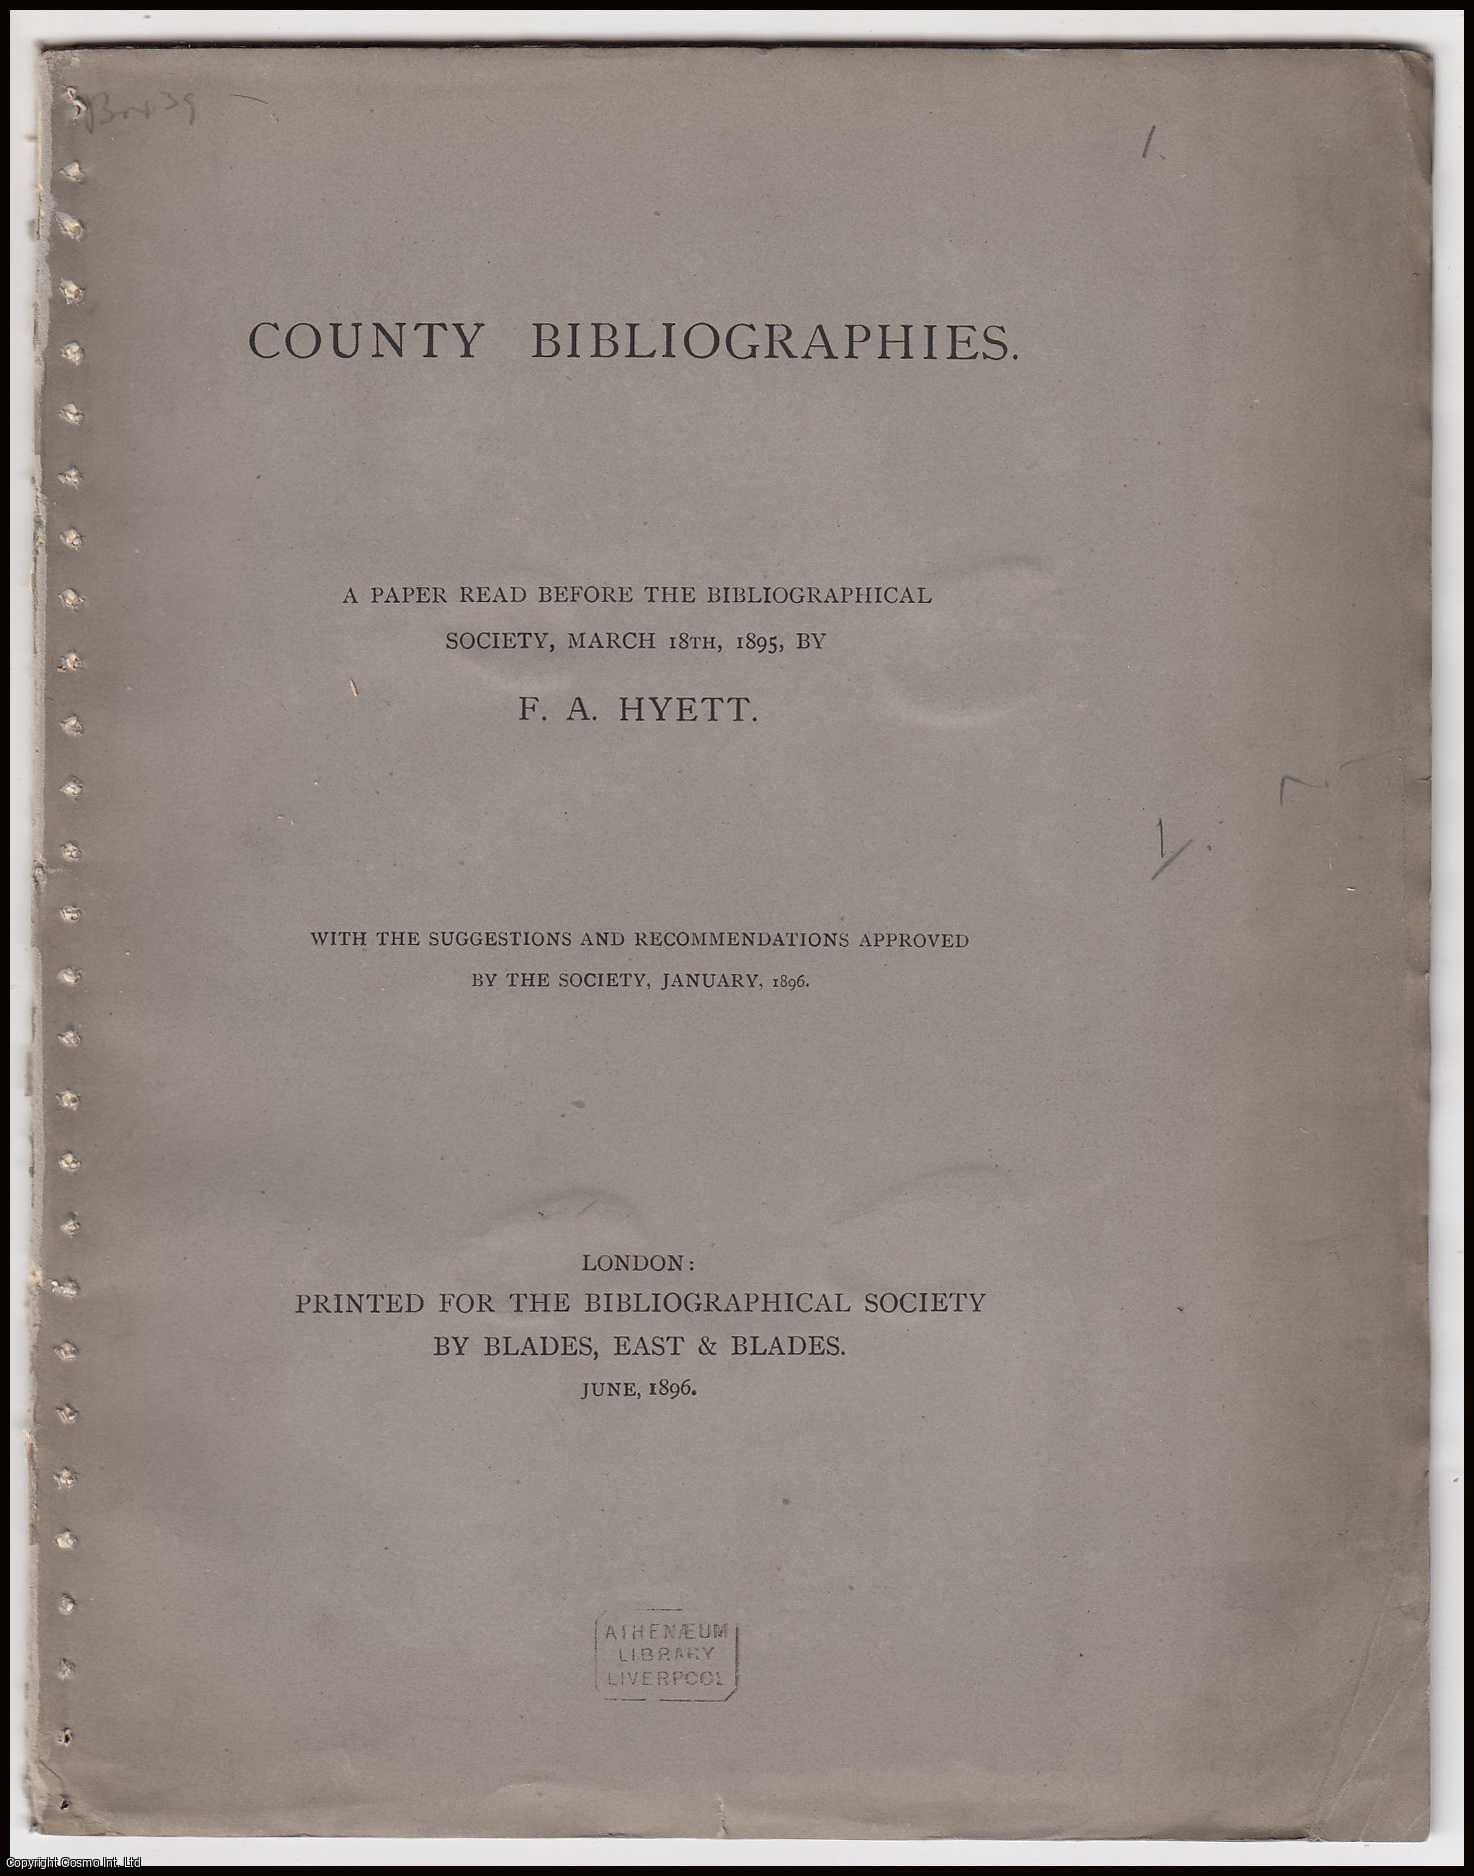 F.A. Hyett - County Bibliographies. A paper read before the Bibliographical Society, March 18th, 1895. With the Suggestions and Recommendations Approved by the Society, January 1896.